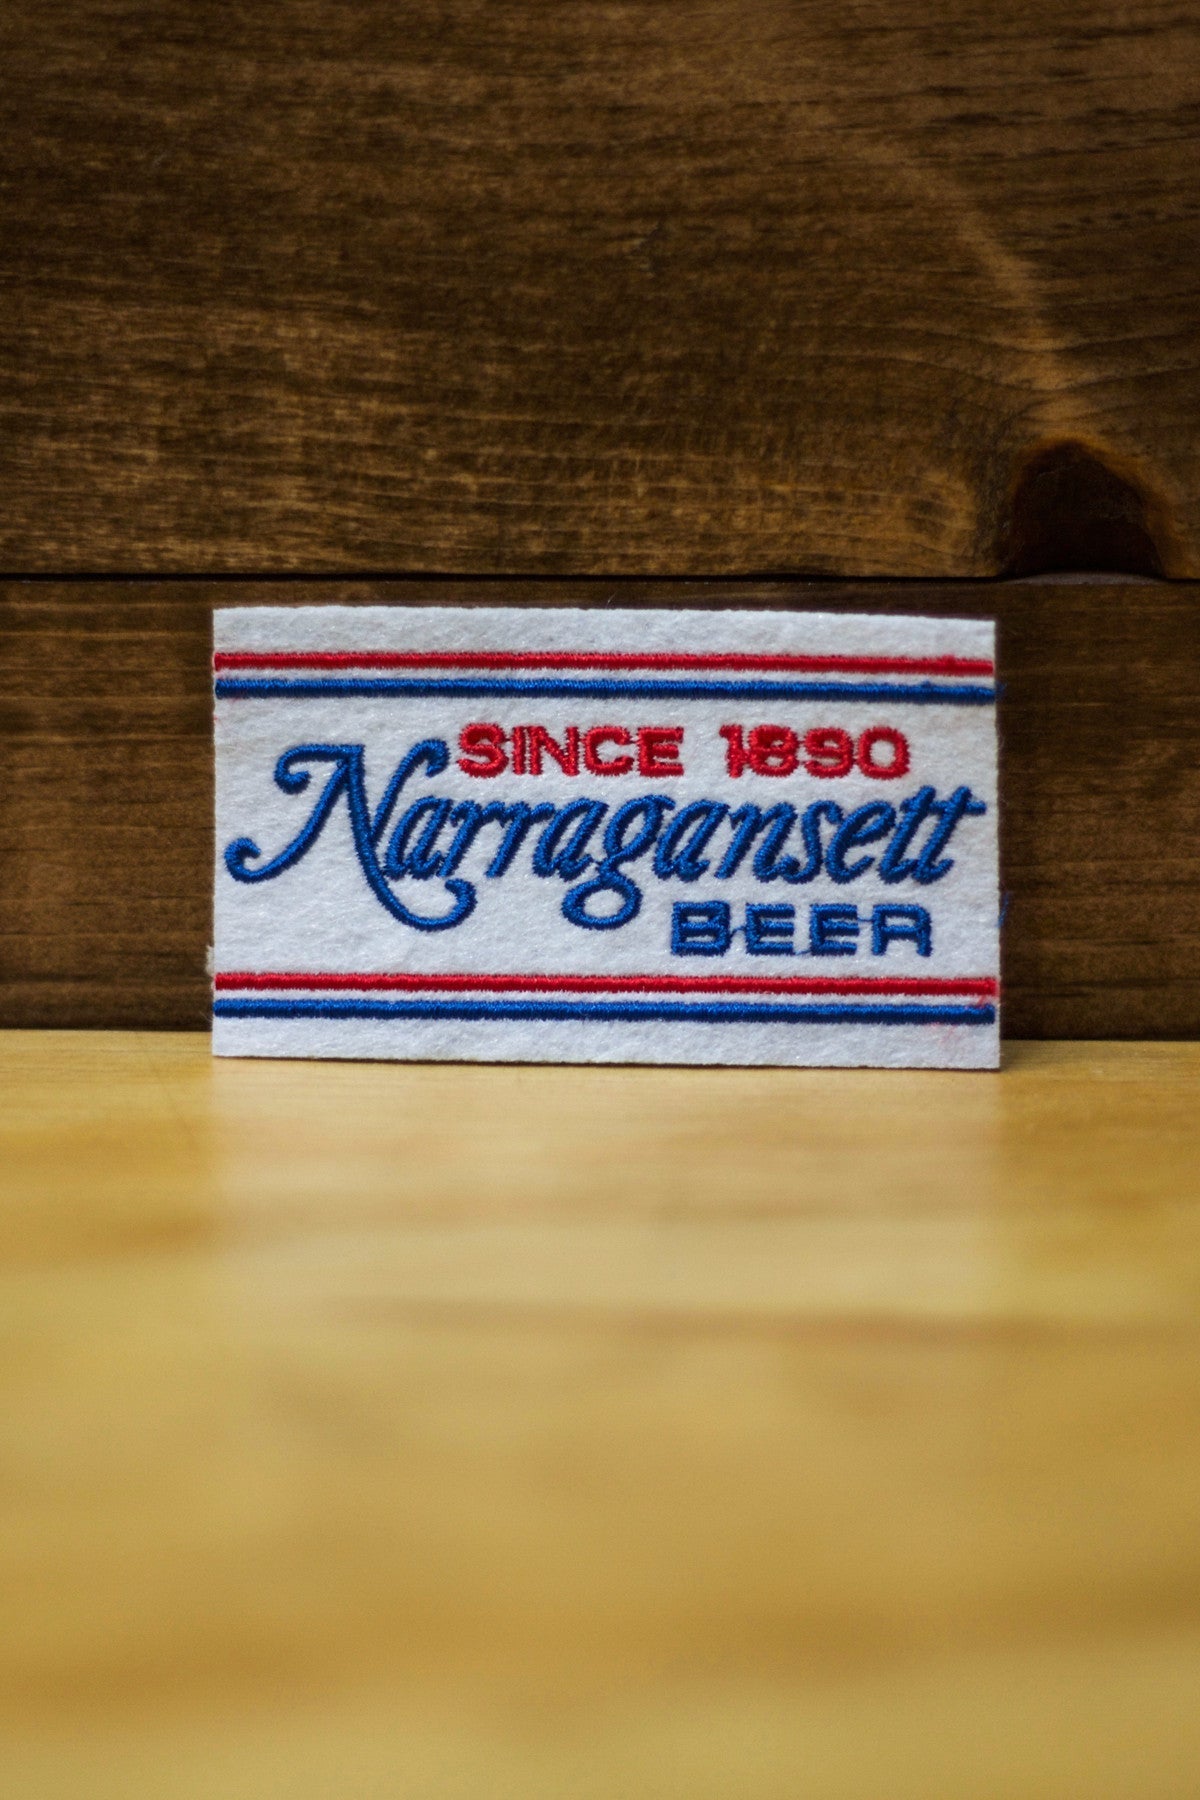 The 1980 Patch